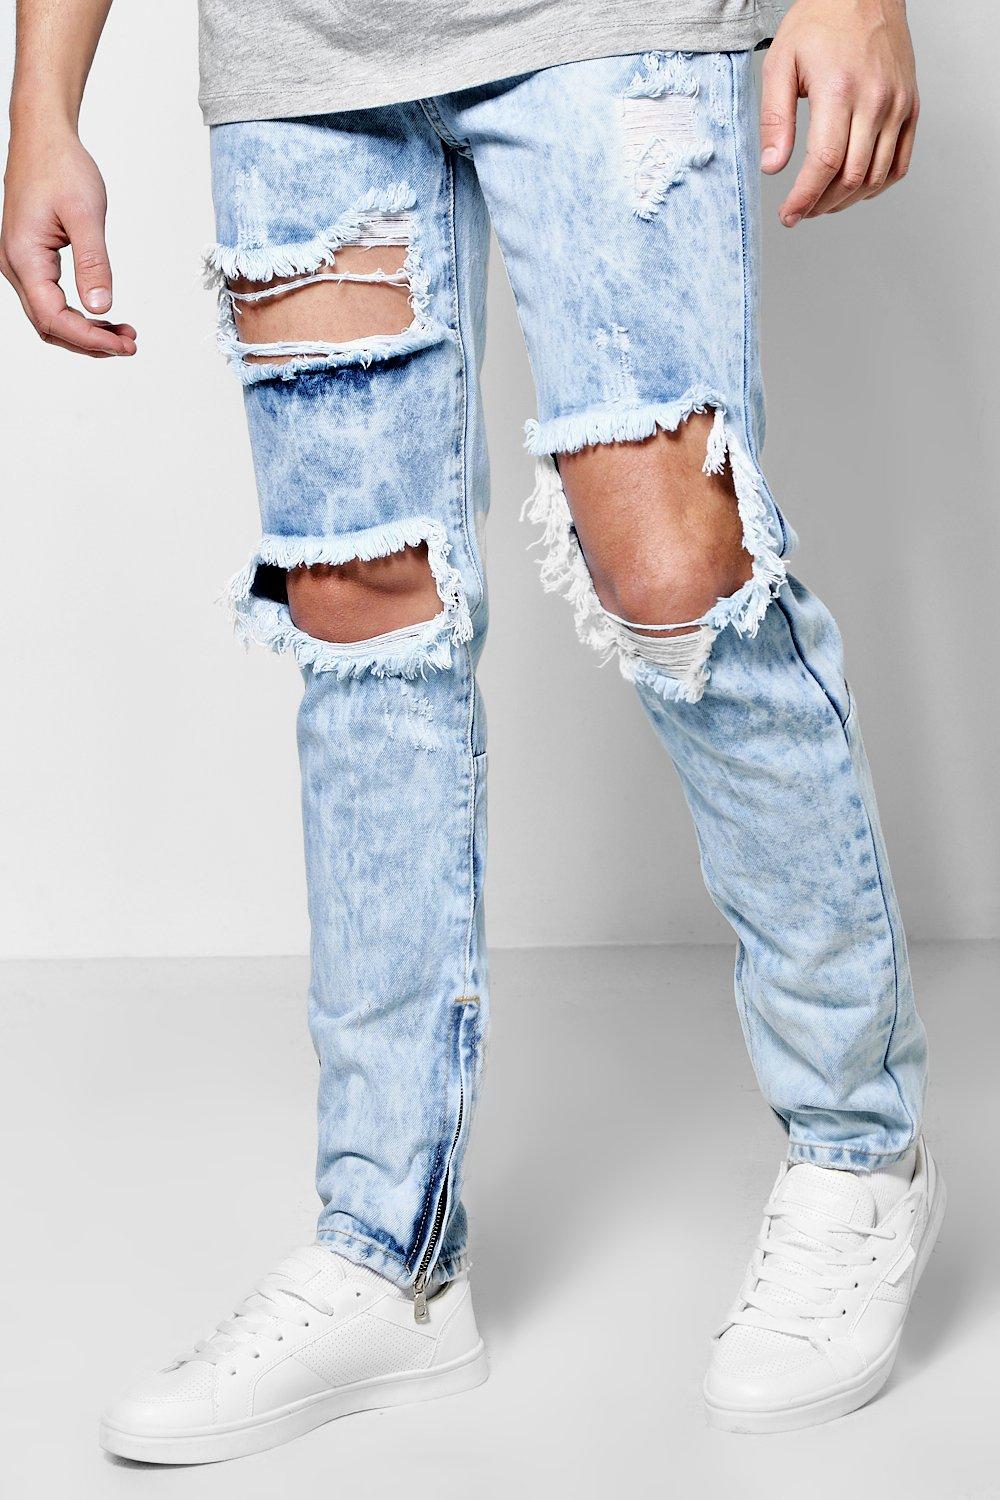 acid wash ripped jeans mens